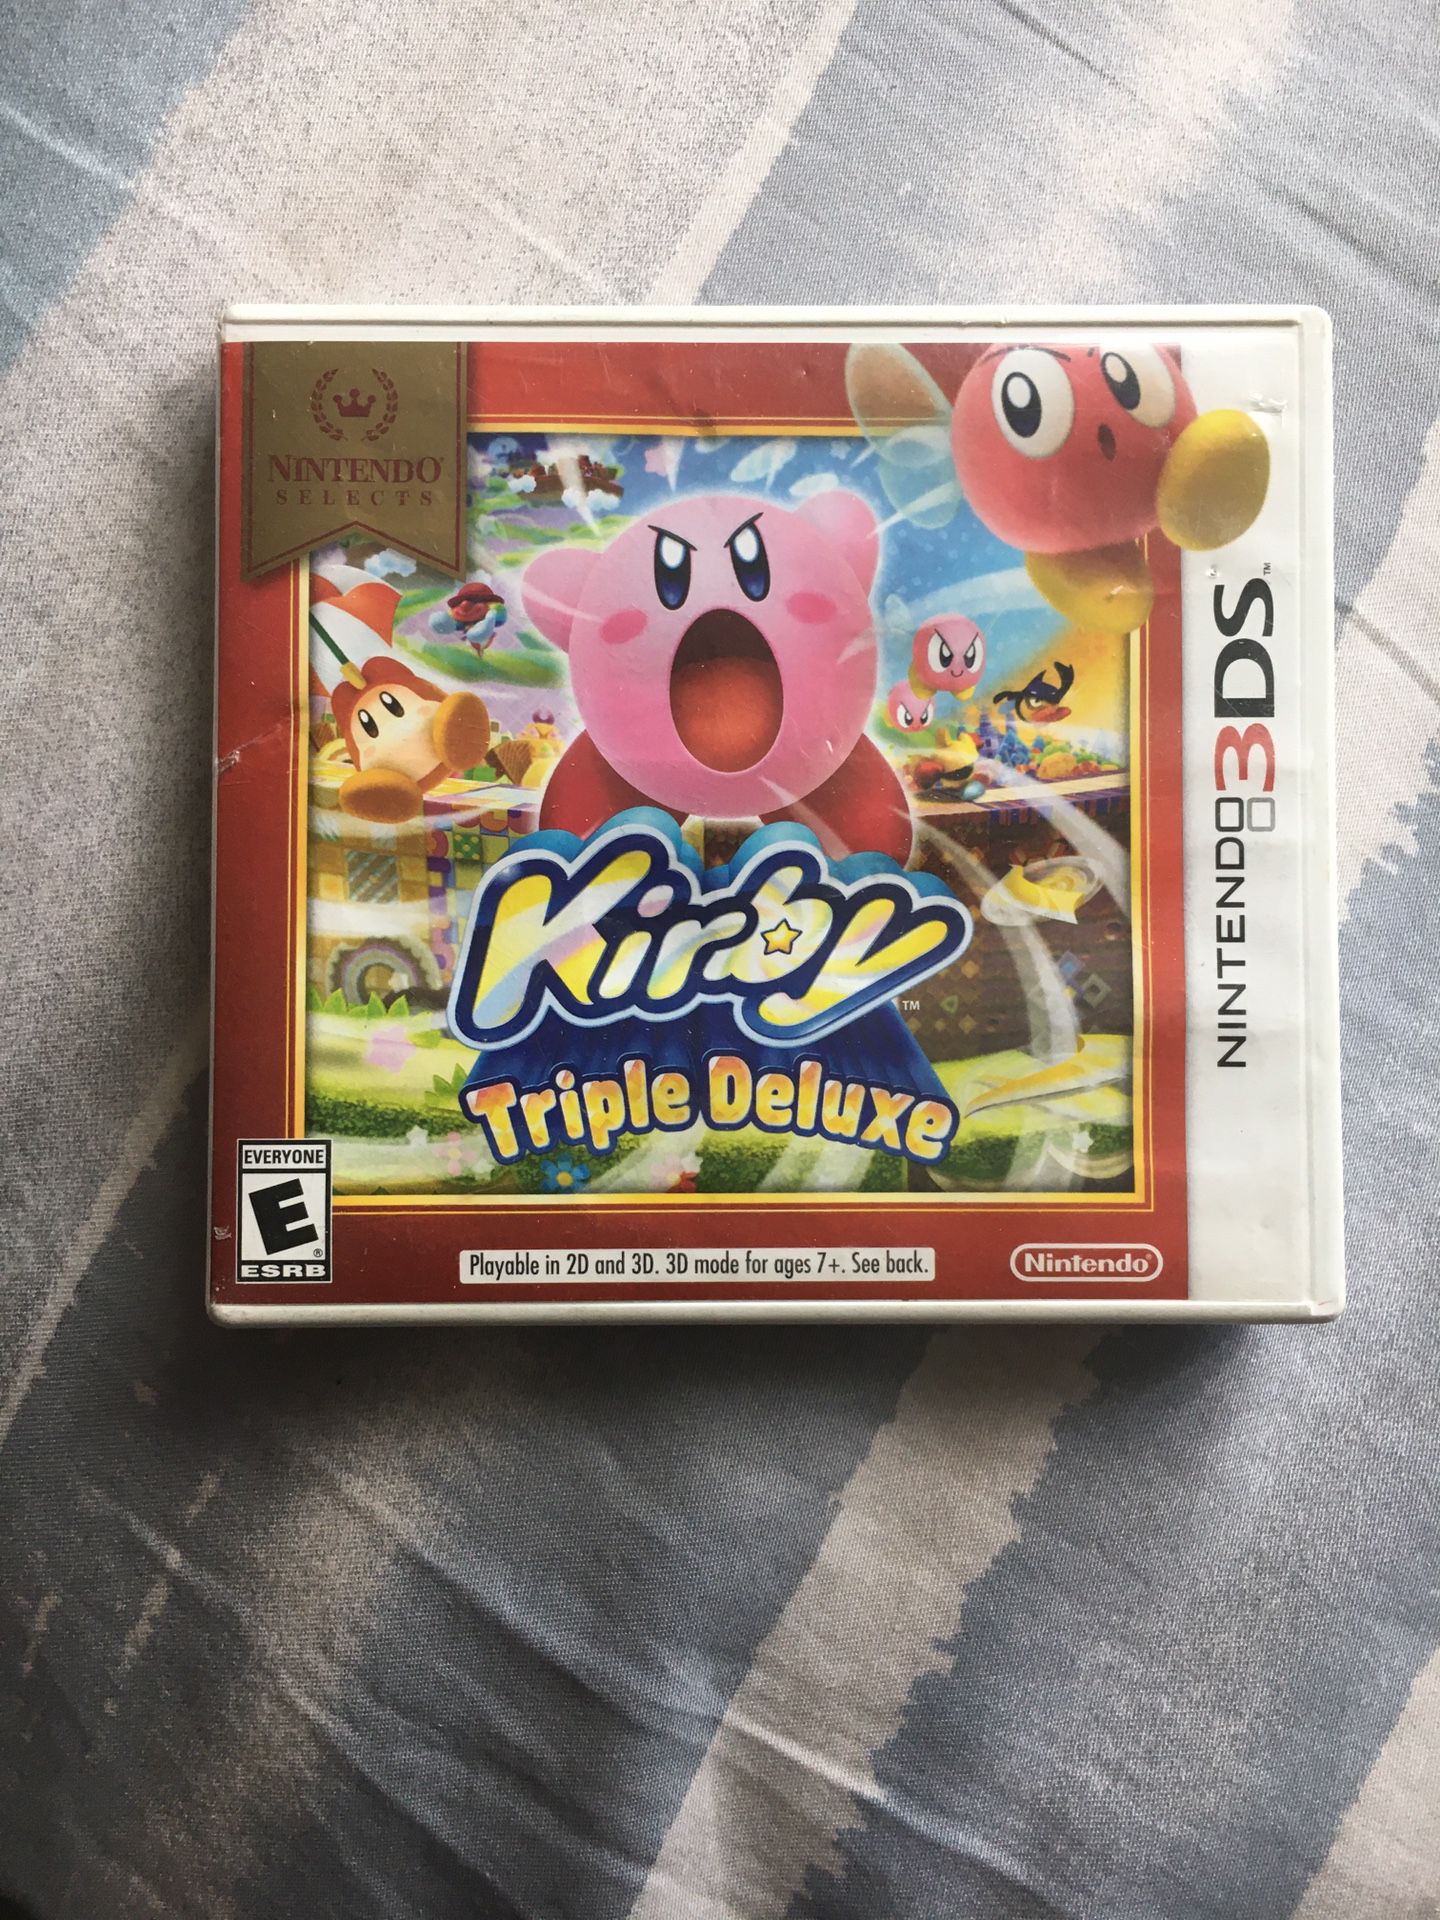 Kirby Triple Deluxe on Nintendo 3DS (👉🏽Check out and follow my page for more games, electronic, collectables, toys and more stuff such as new shoes 